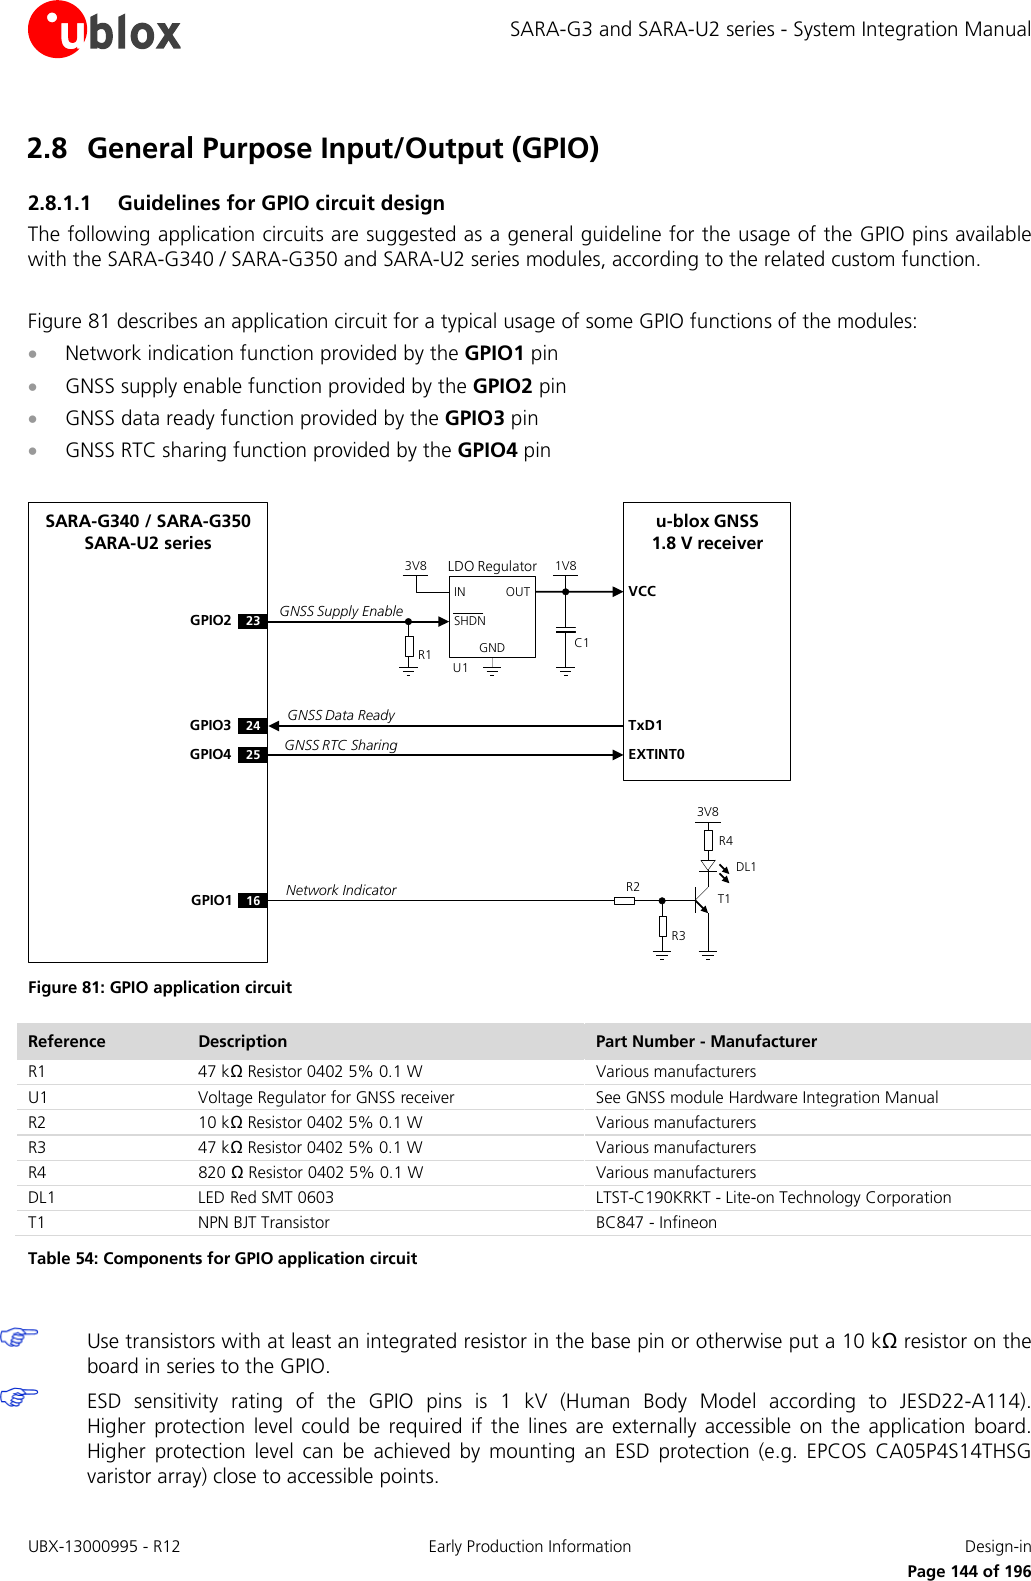 SARA-G3 and SARA-U2 series - System Integration Manual 2.8 General Purpose Input/Output (GPIO) 2.8.1.1 Guidelines for GPIO circuit design The following application circuits are suggested as a general guideline for the usage of the GPIO pins available with the SARA-G340 / SARA-G350 and SARA-U2 series modules, according to the related custom function.  Figure 81 describes an application circuit for a typical usage of some GPIO functions of the modules: • Network indication function provided by the GPIO1 pin • GNSS supply enable function provided by the GPIO2 pin • GNSS data ready function provided by the GPIO3 pin • GNSS RTC sharing function provided by the GPIO4 pin  OUTINGNDLDO RegulatorSHDN3V8 1V8GPIO3GPIO4TxD1EXTINT02425R1VCCGPIO2 23SARA-G340 / SARA-G350SARA-U2 seriesu-blox GNSS 1.8 V receiverU1C1R2R43V8Network IndicatorR3GNSS Supply EnableGNSS Data ReadyGNSS RTC Sharing16GPIO1DL1T1 Figure 81: GPIO application circuit Reference Description Part Number - Manufacturer R1 47 kΩ Resistor 0402 5% 0.1 W Various manufacturers U1 Voltage Regulator for GNSS receiver See GNSS module Hardware Integration Manual R2 10 kΩ Resistor 0402 5% 0.1 W Various manufacturers R3 47 kΩ Resistor 0402 5% 0.1 W Various manufacturers R4 820 Ω Resistor 0402 5% 0.1 W Various manufacturers DL1 LED Red SMT 0603 LTST-C190KRKT - Lite-on Technology Corporation T1 NPN BJT Transistor BC847 - Infineon Table 54: Components for GPIO application circuit   Use transistors with at least an integrated resistor in the base pin or otherwise put a 10 kΩ resistor on the board in series to the GPIO.  ESD sensitivity rating of the GPIO pins is 1 kV (Human Body Model according to JESD22-A114).  Higher protection level could be required if the lines are externally accessible on the application board. Higher protection level can be achieved by mounting an ESD protection (e.g. EPCOS CA05P4S14THSG varistor array) close to accessible points. UBX-13000995 - R12 Early Production Information Design-in     Page 144 of 196 